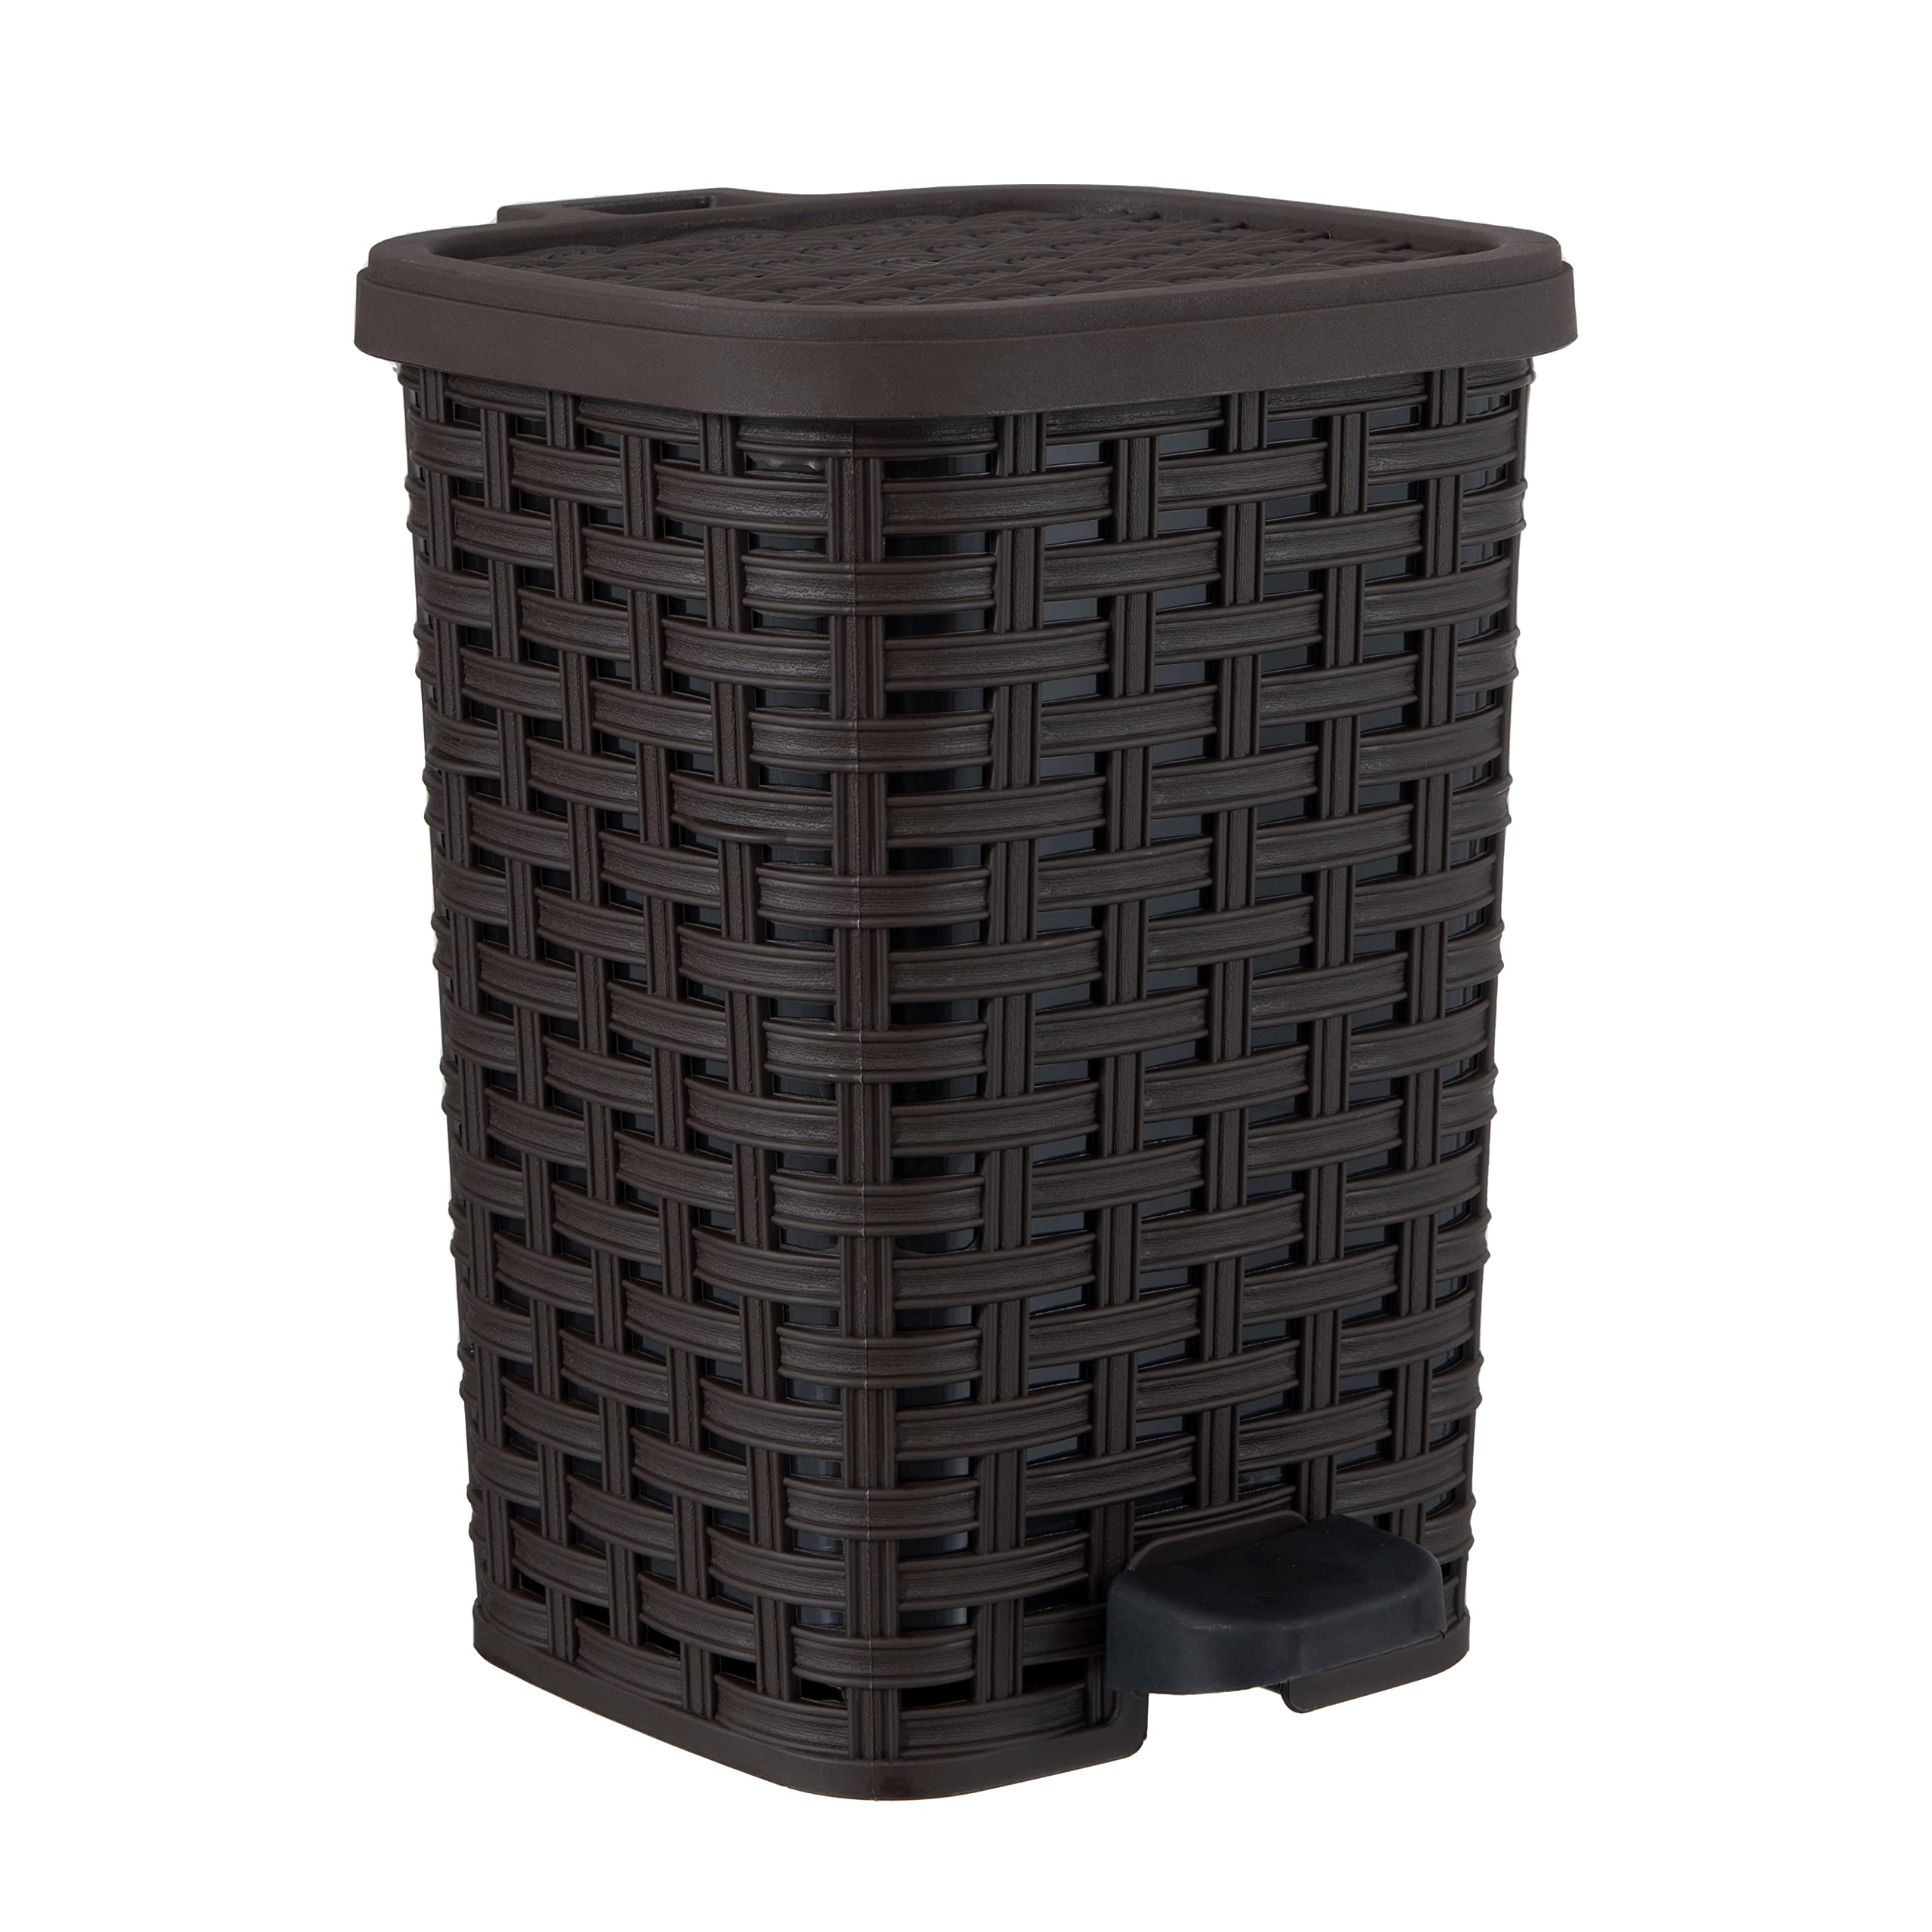 Superio Small Wicker Step On Trash Can with Foot Pedal – Outdoor and Indoor Brown 6 qt Trash Can, Waste Basket for Bathroom, Kitchen, Office, Patio, or Backyard